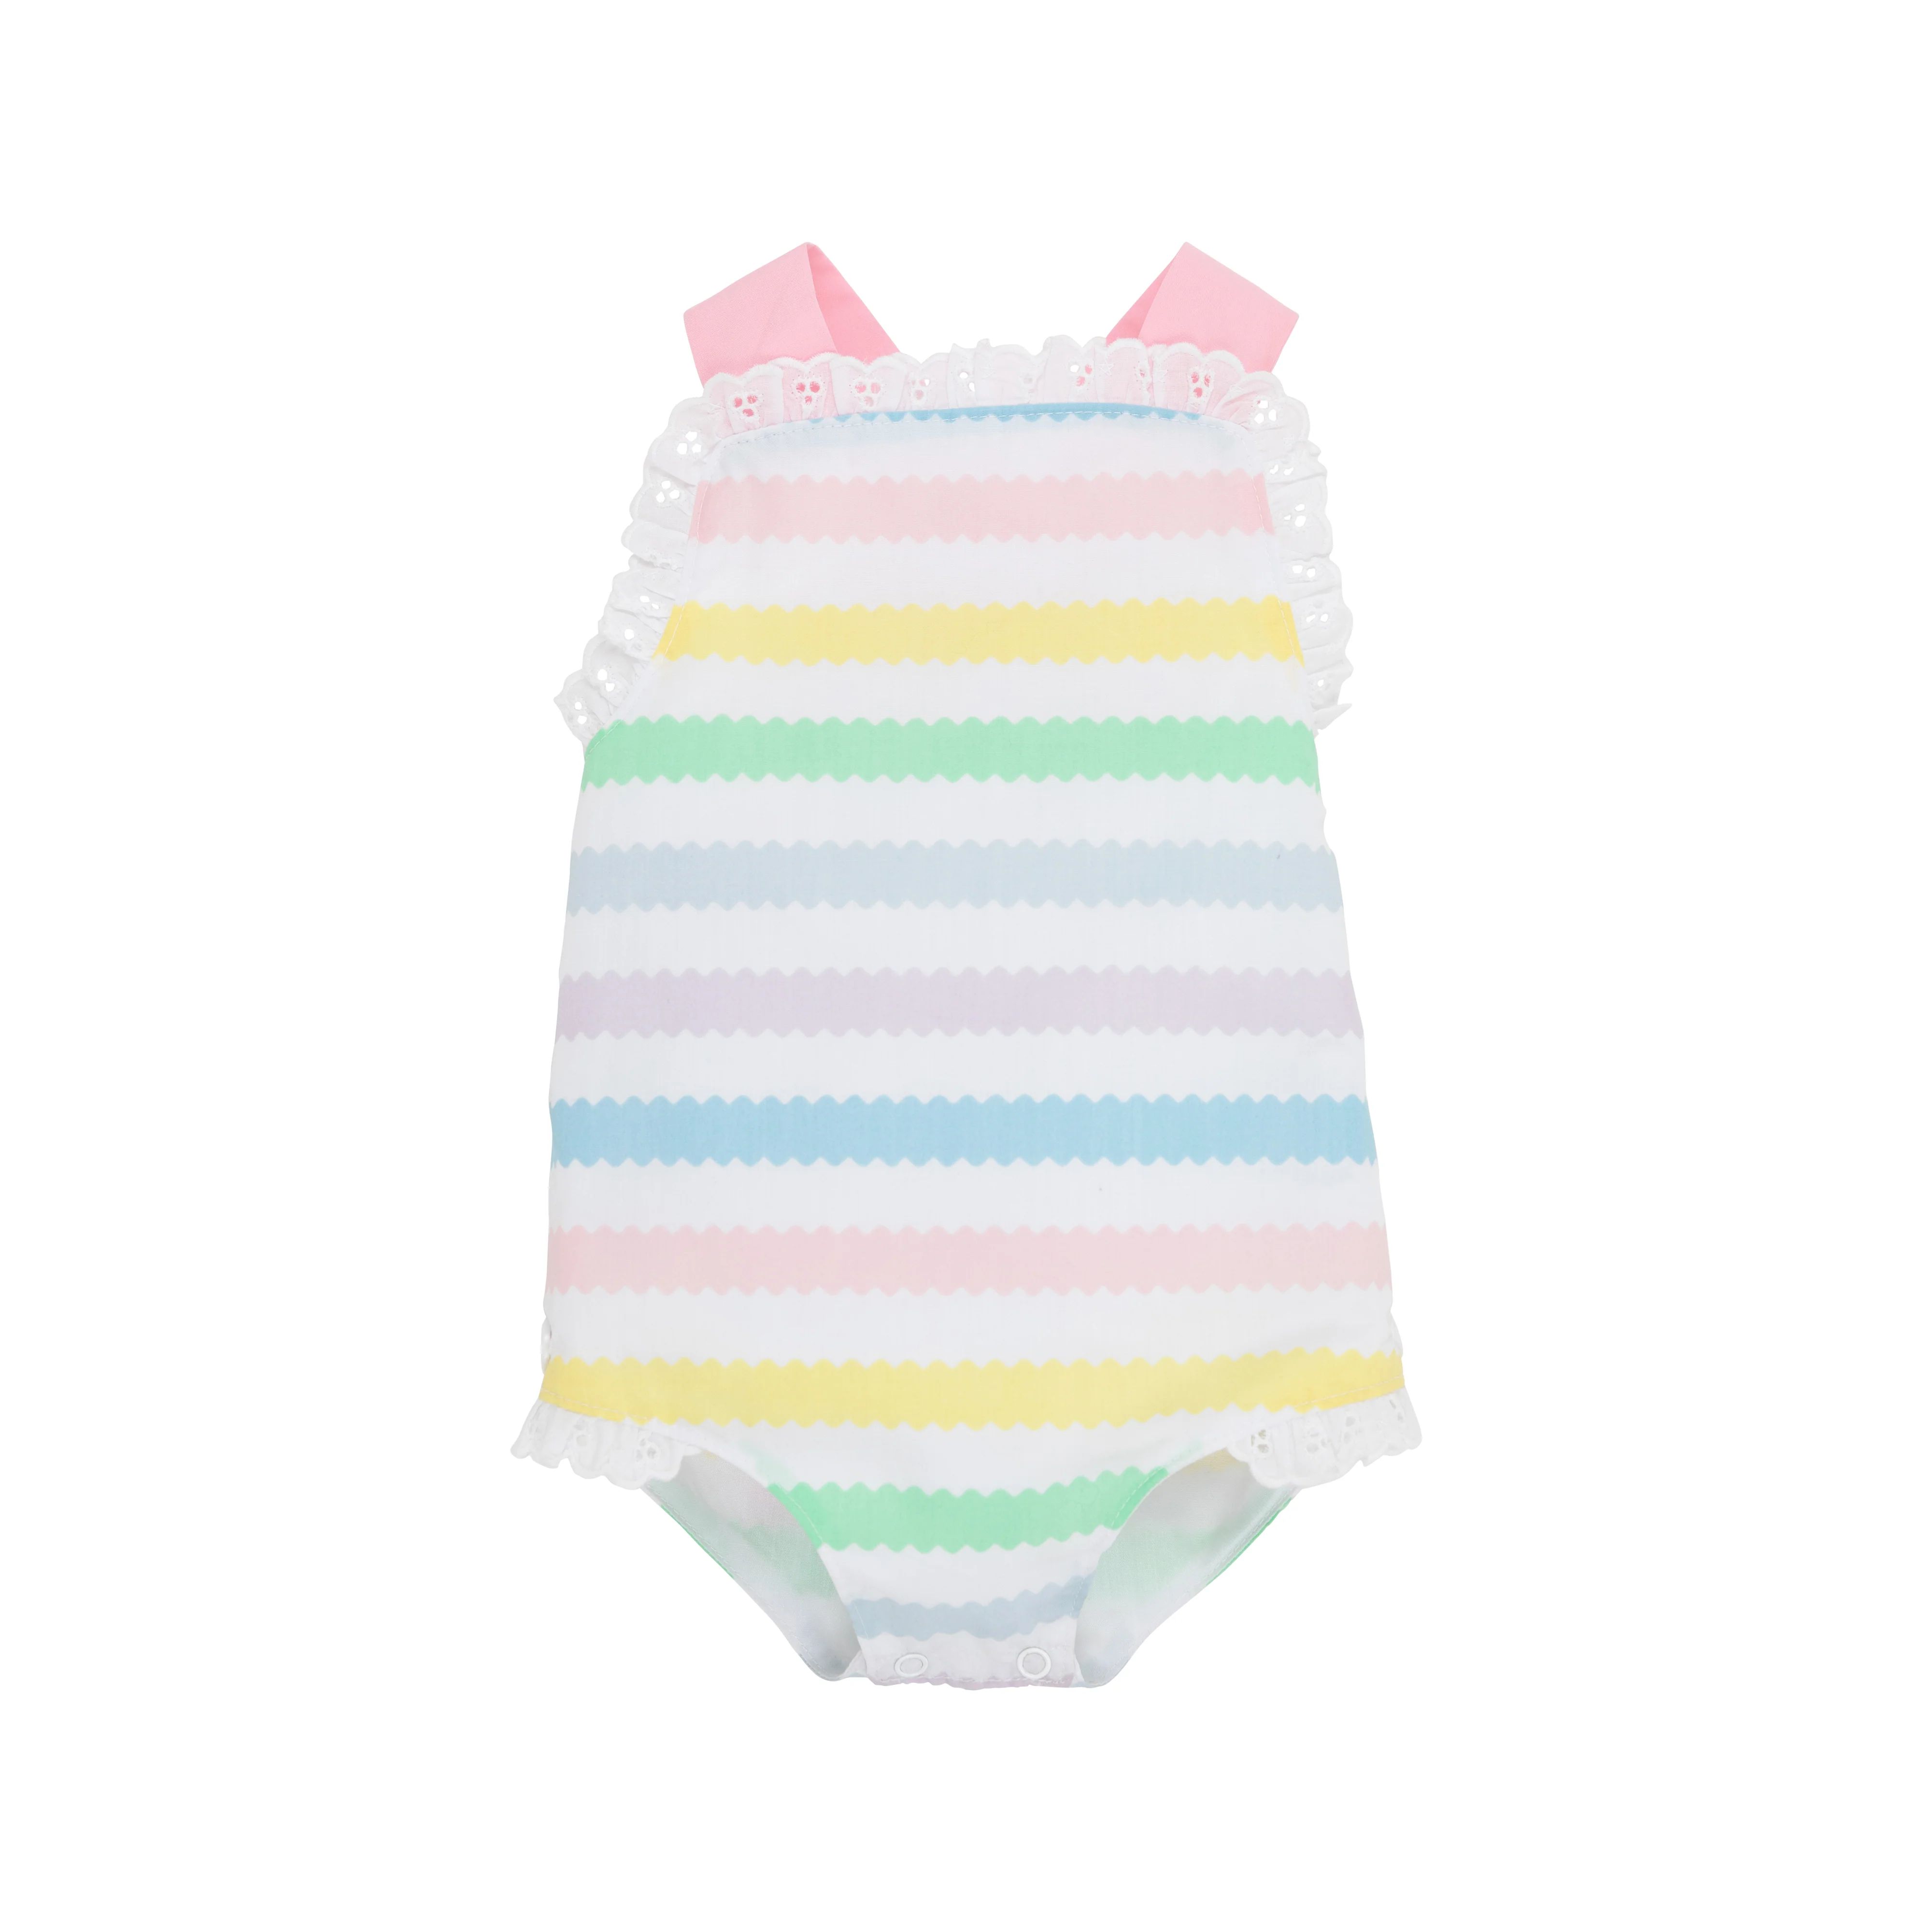 Sisi Sunsuit - Wellington Wiggle Stripe with Pier Party Pink | The Beaufort Bonnet Company